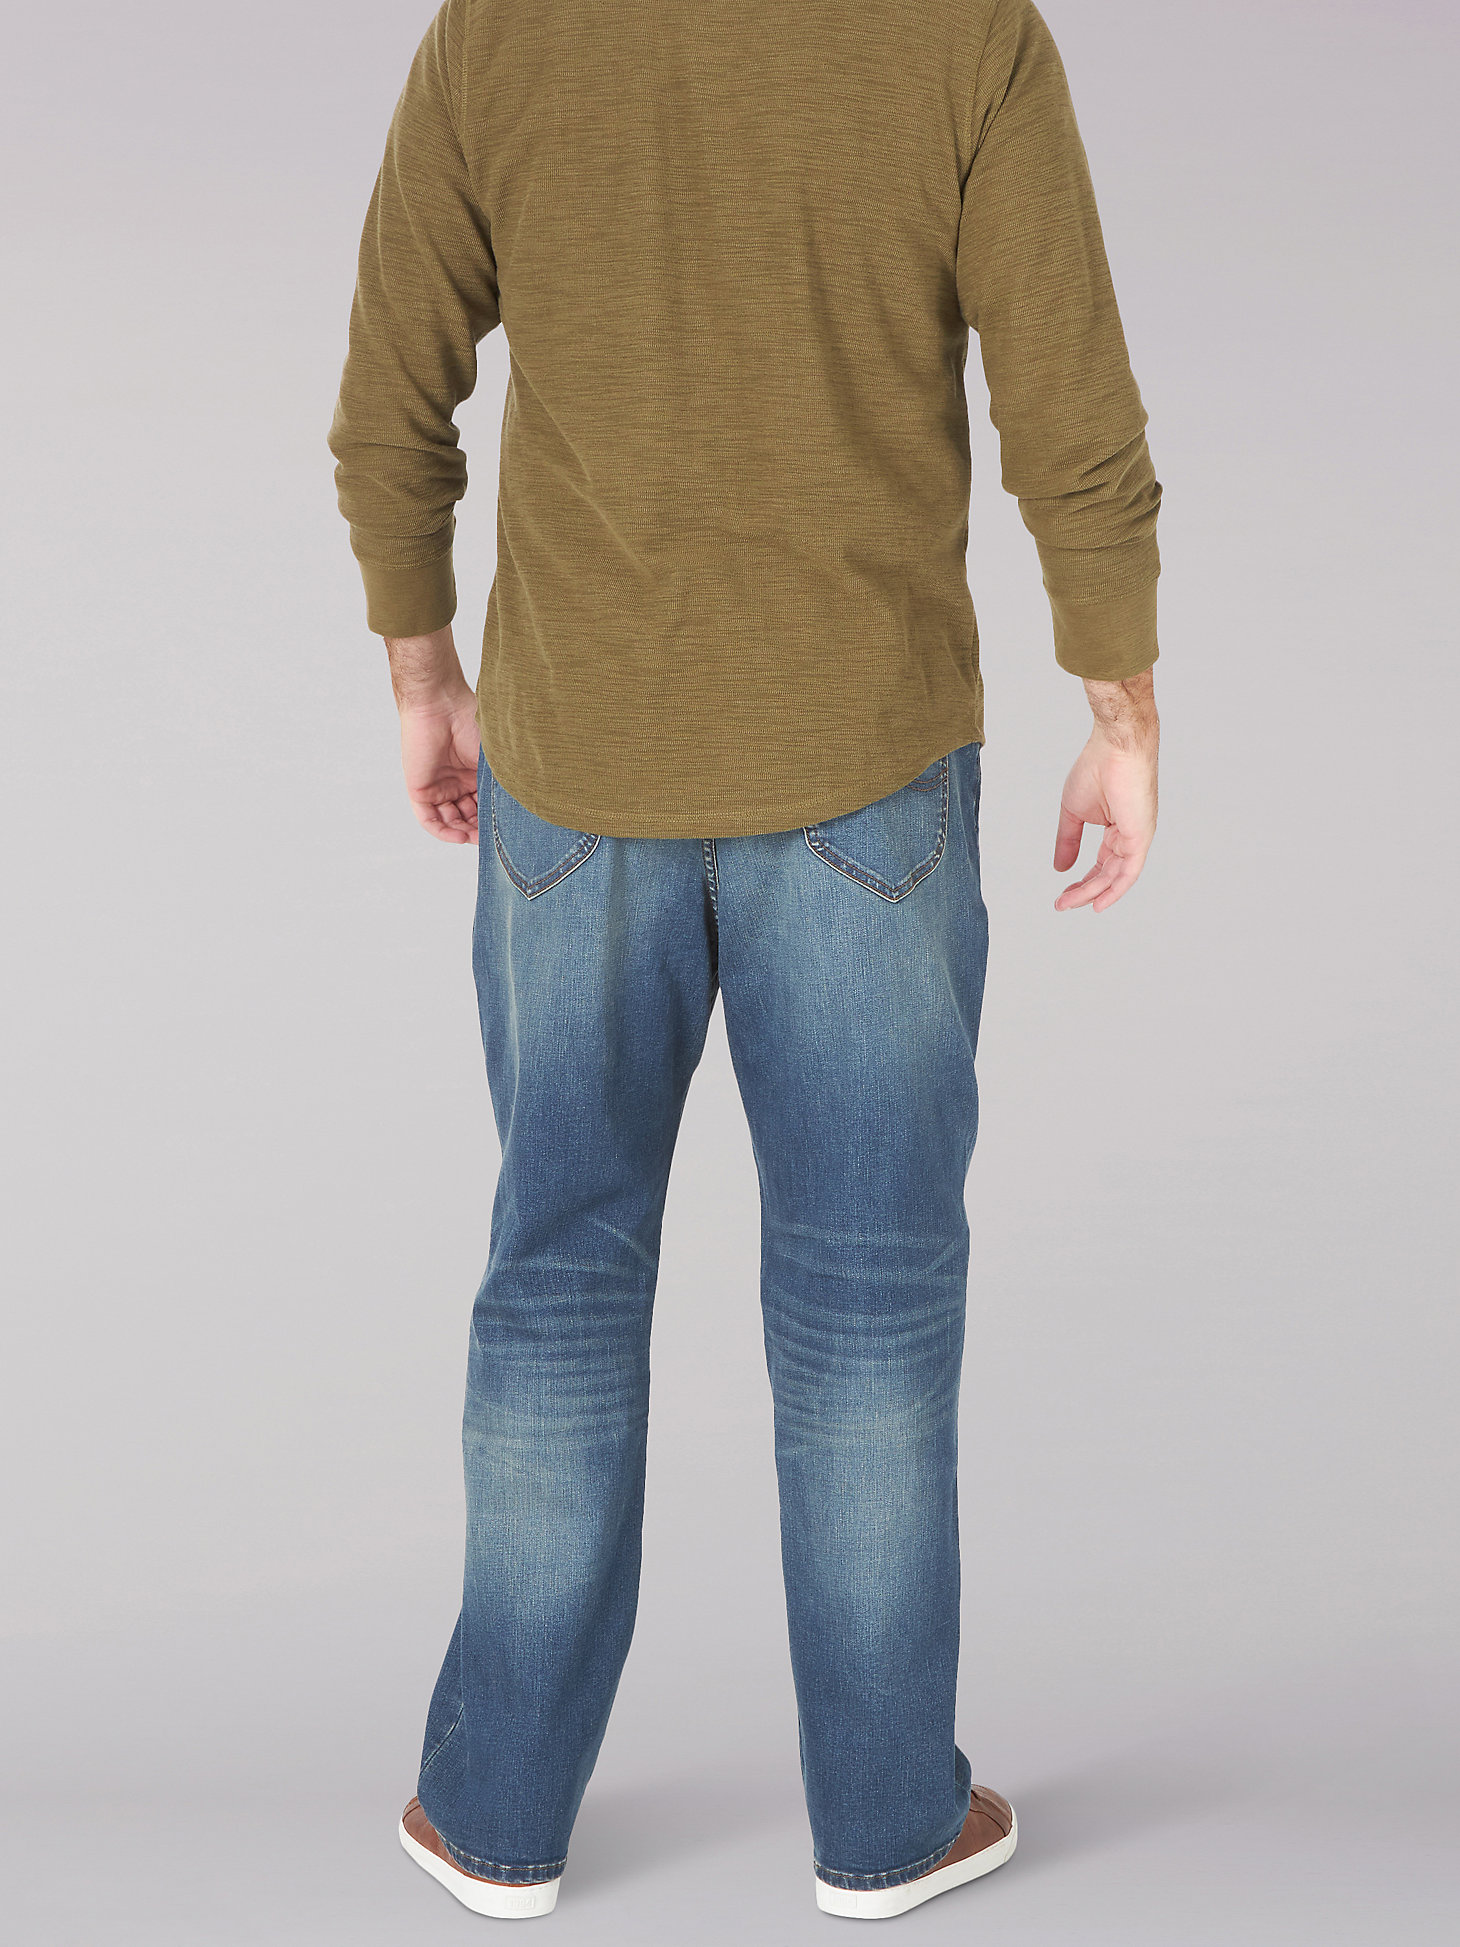 Men's Extreme Motion MVP Relaxed Straight Jean (Big & Tall) in Nelson alternative view 1